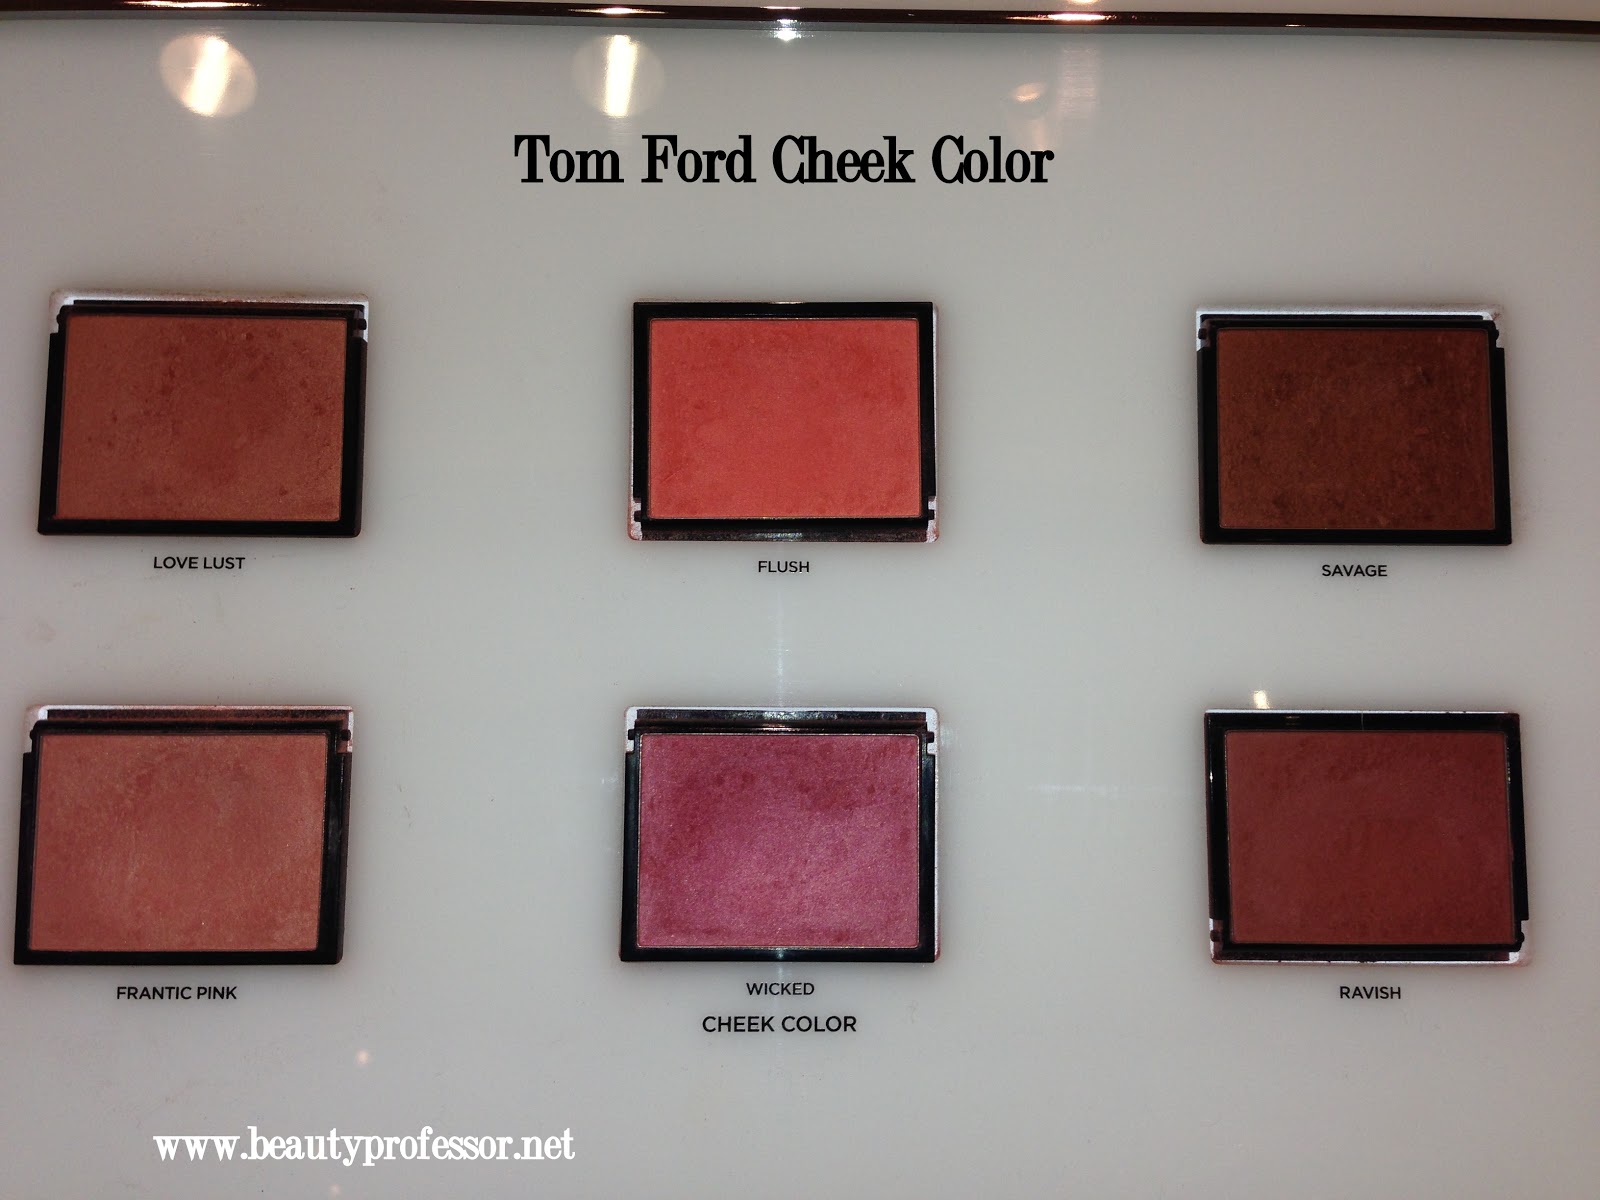 Tom Ford Cheek Color in Frantic Pink - Beauty Professor